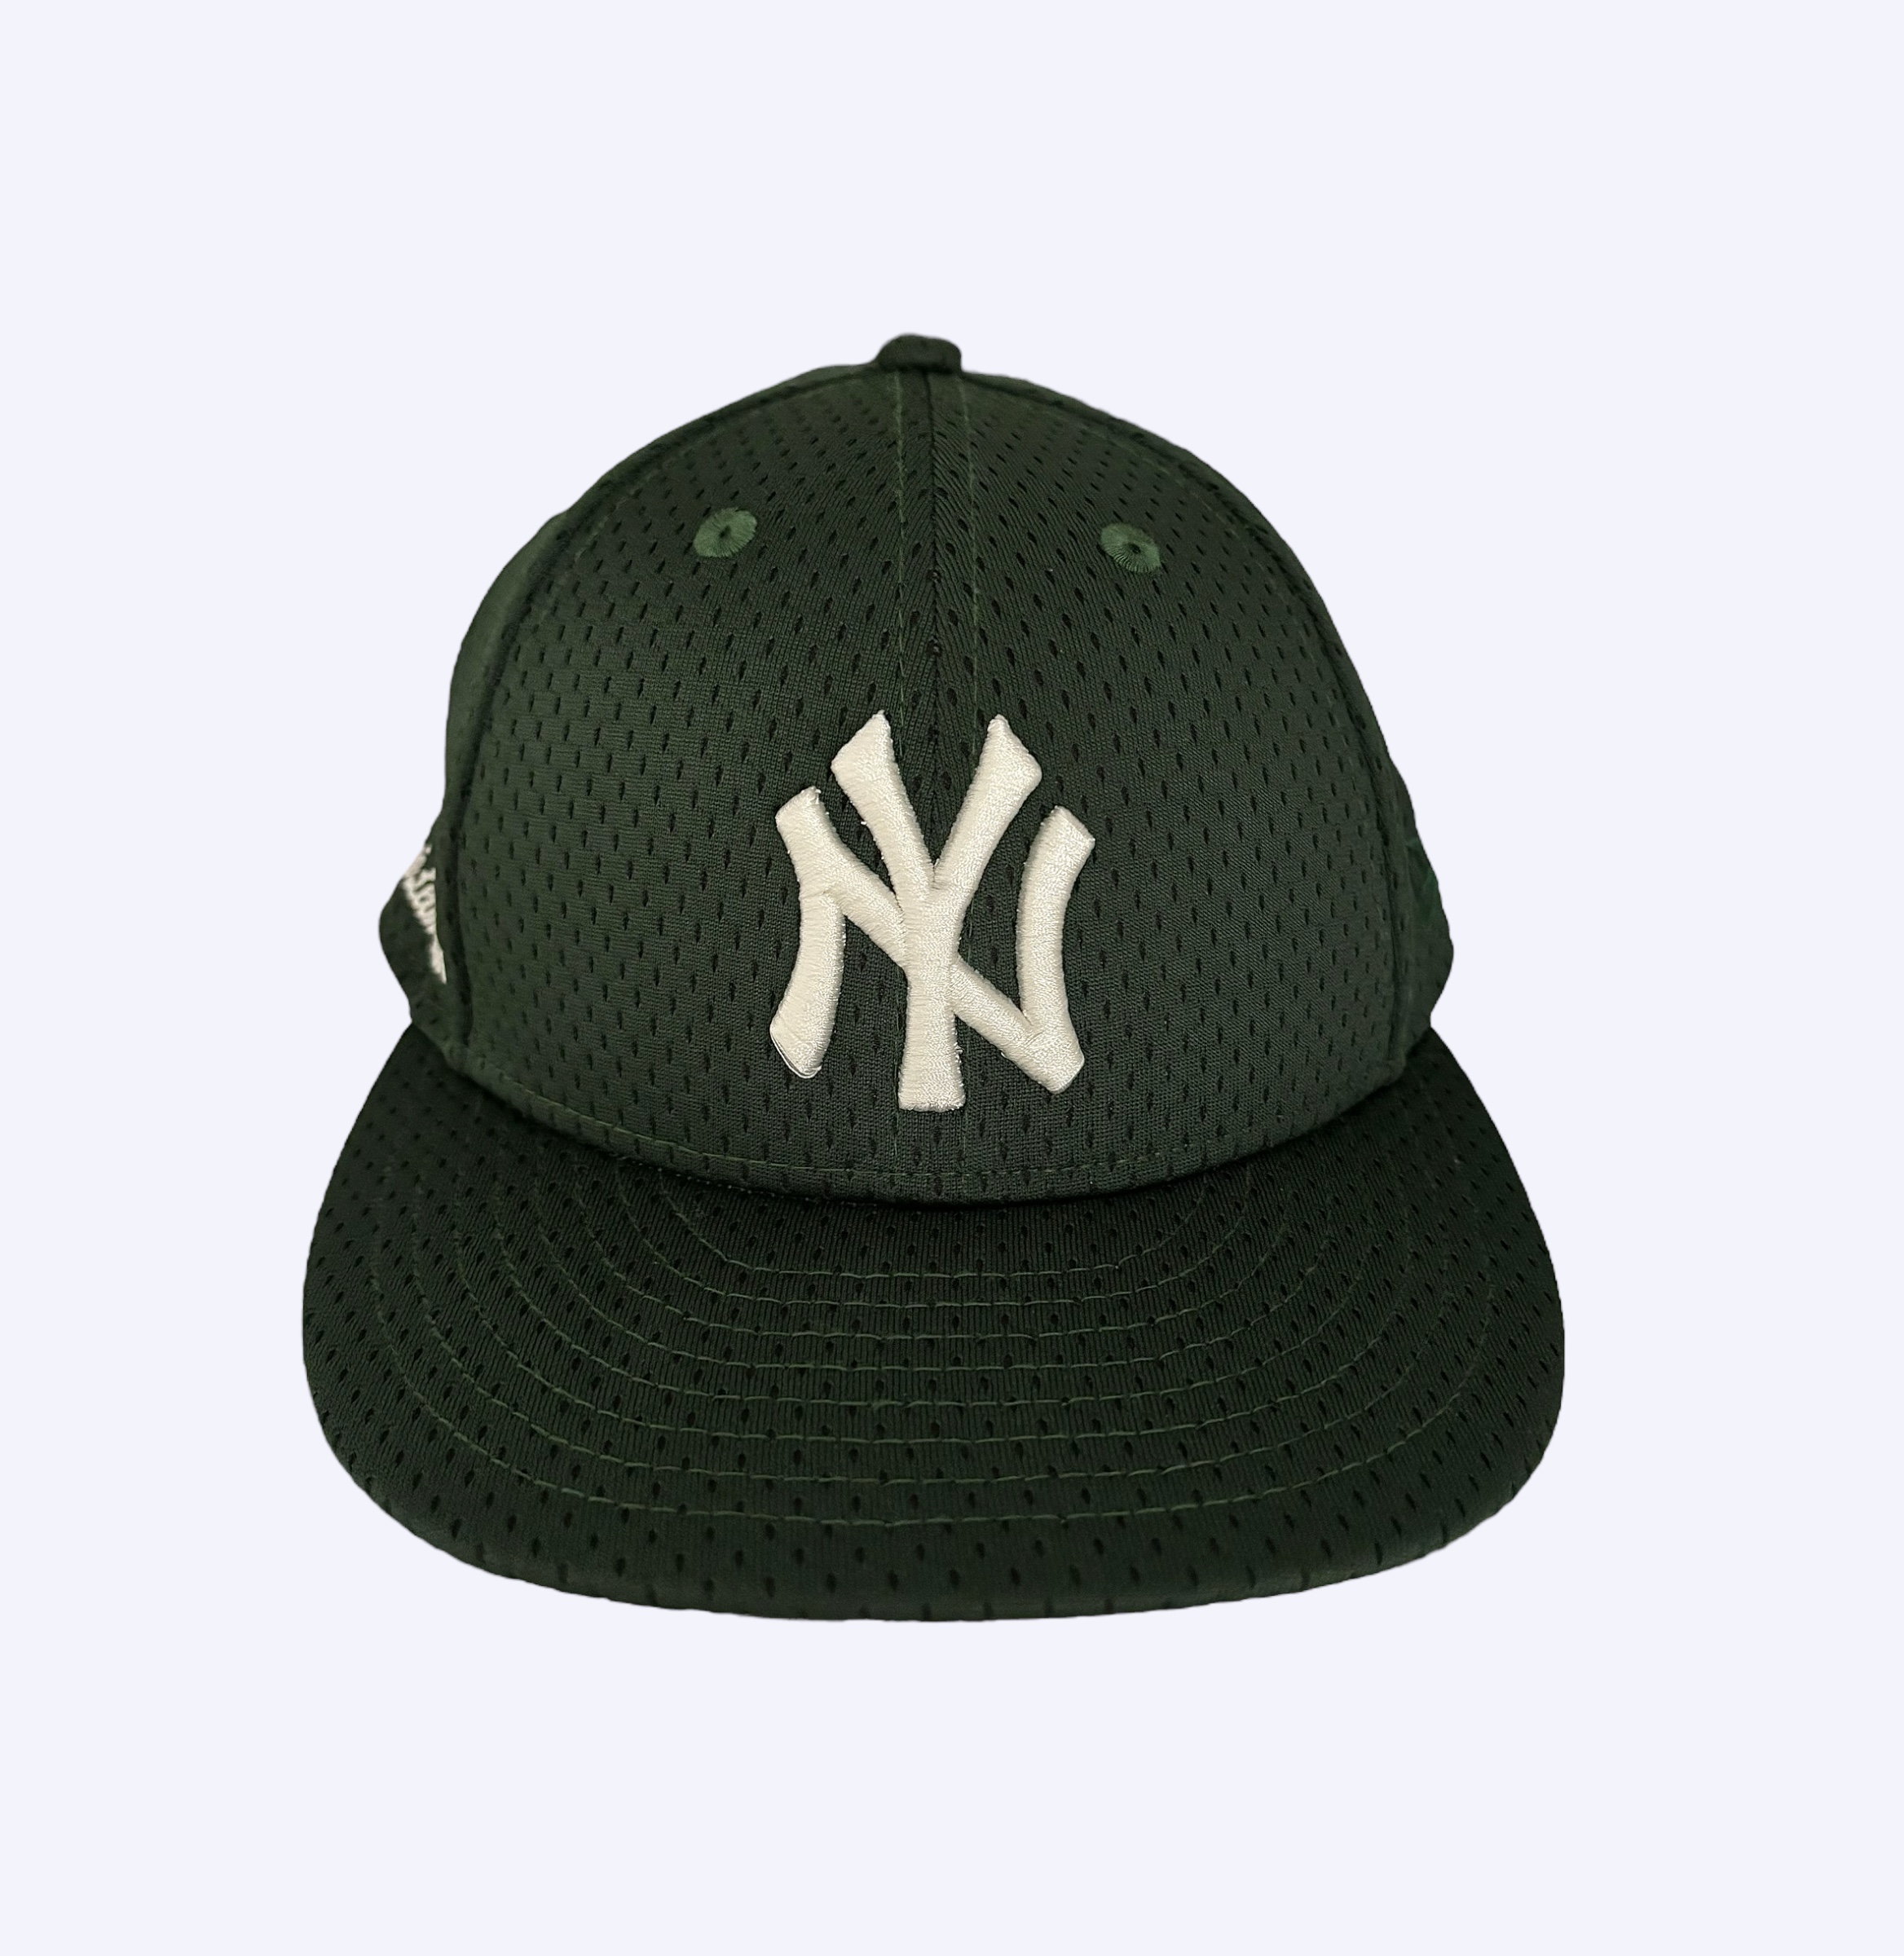 Aime NY Yankee's Fitted Cap in Green Mesh front